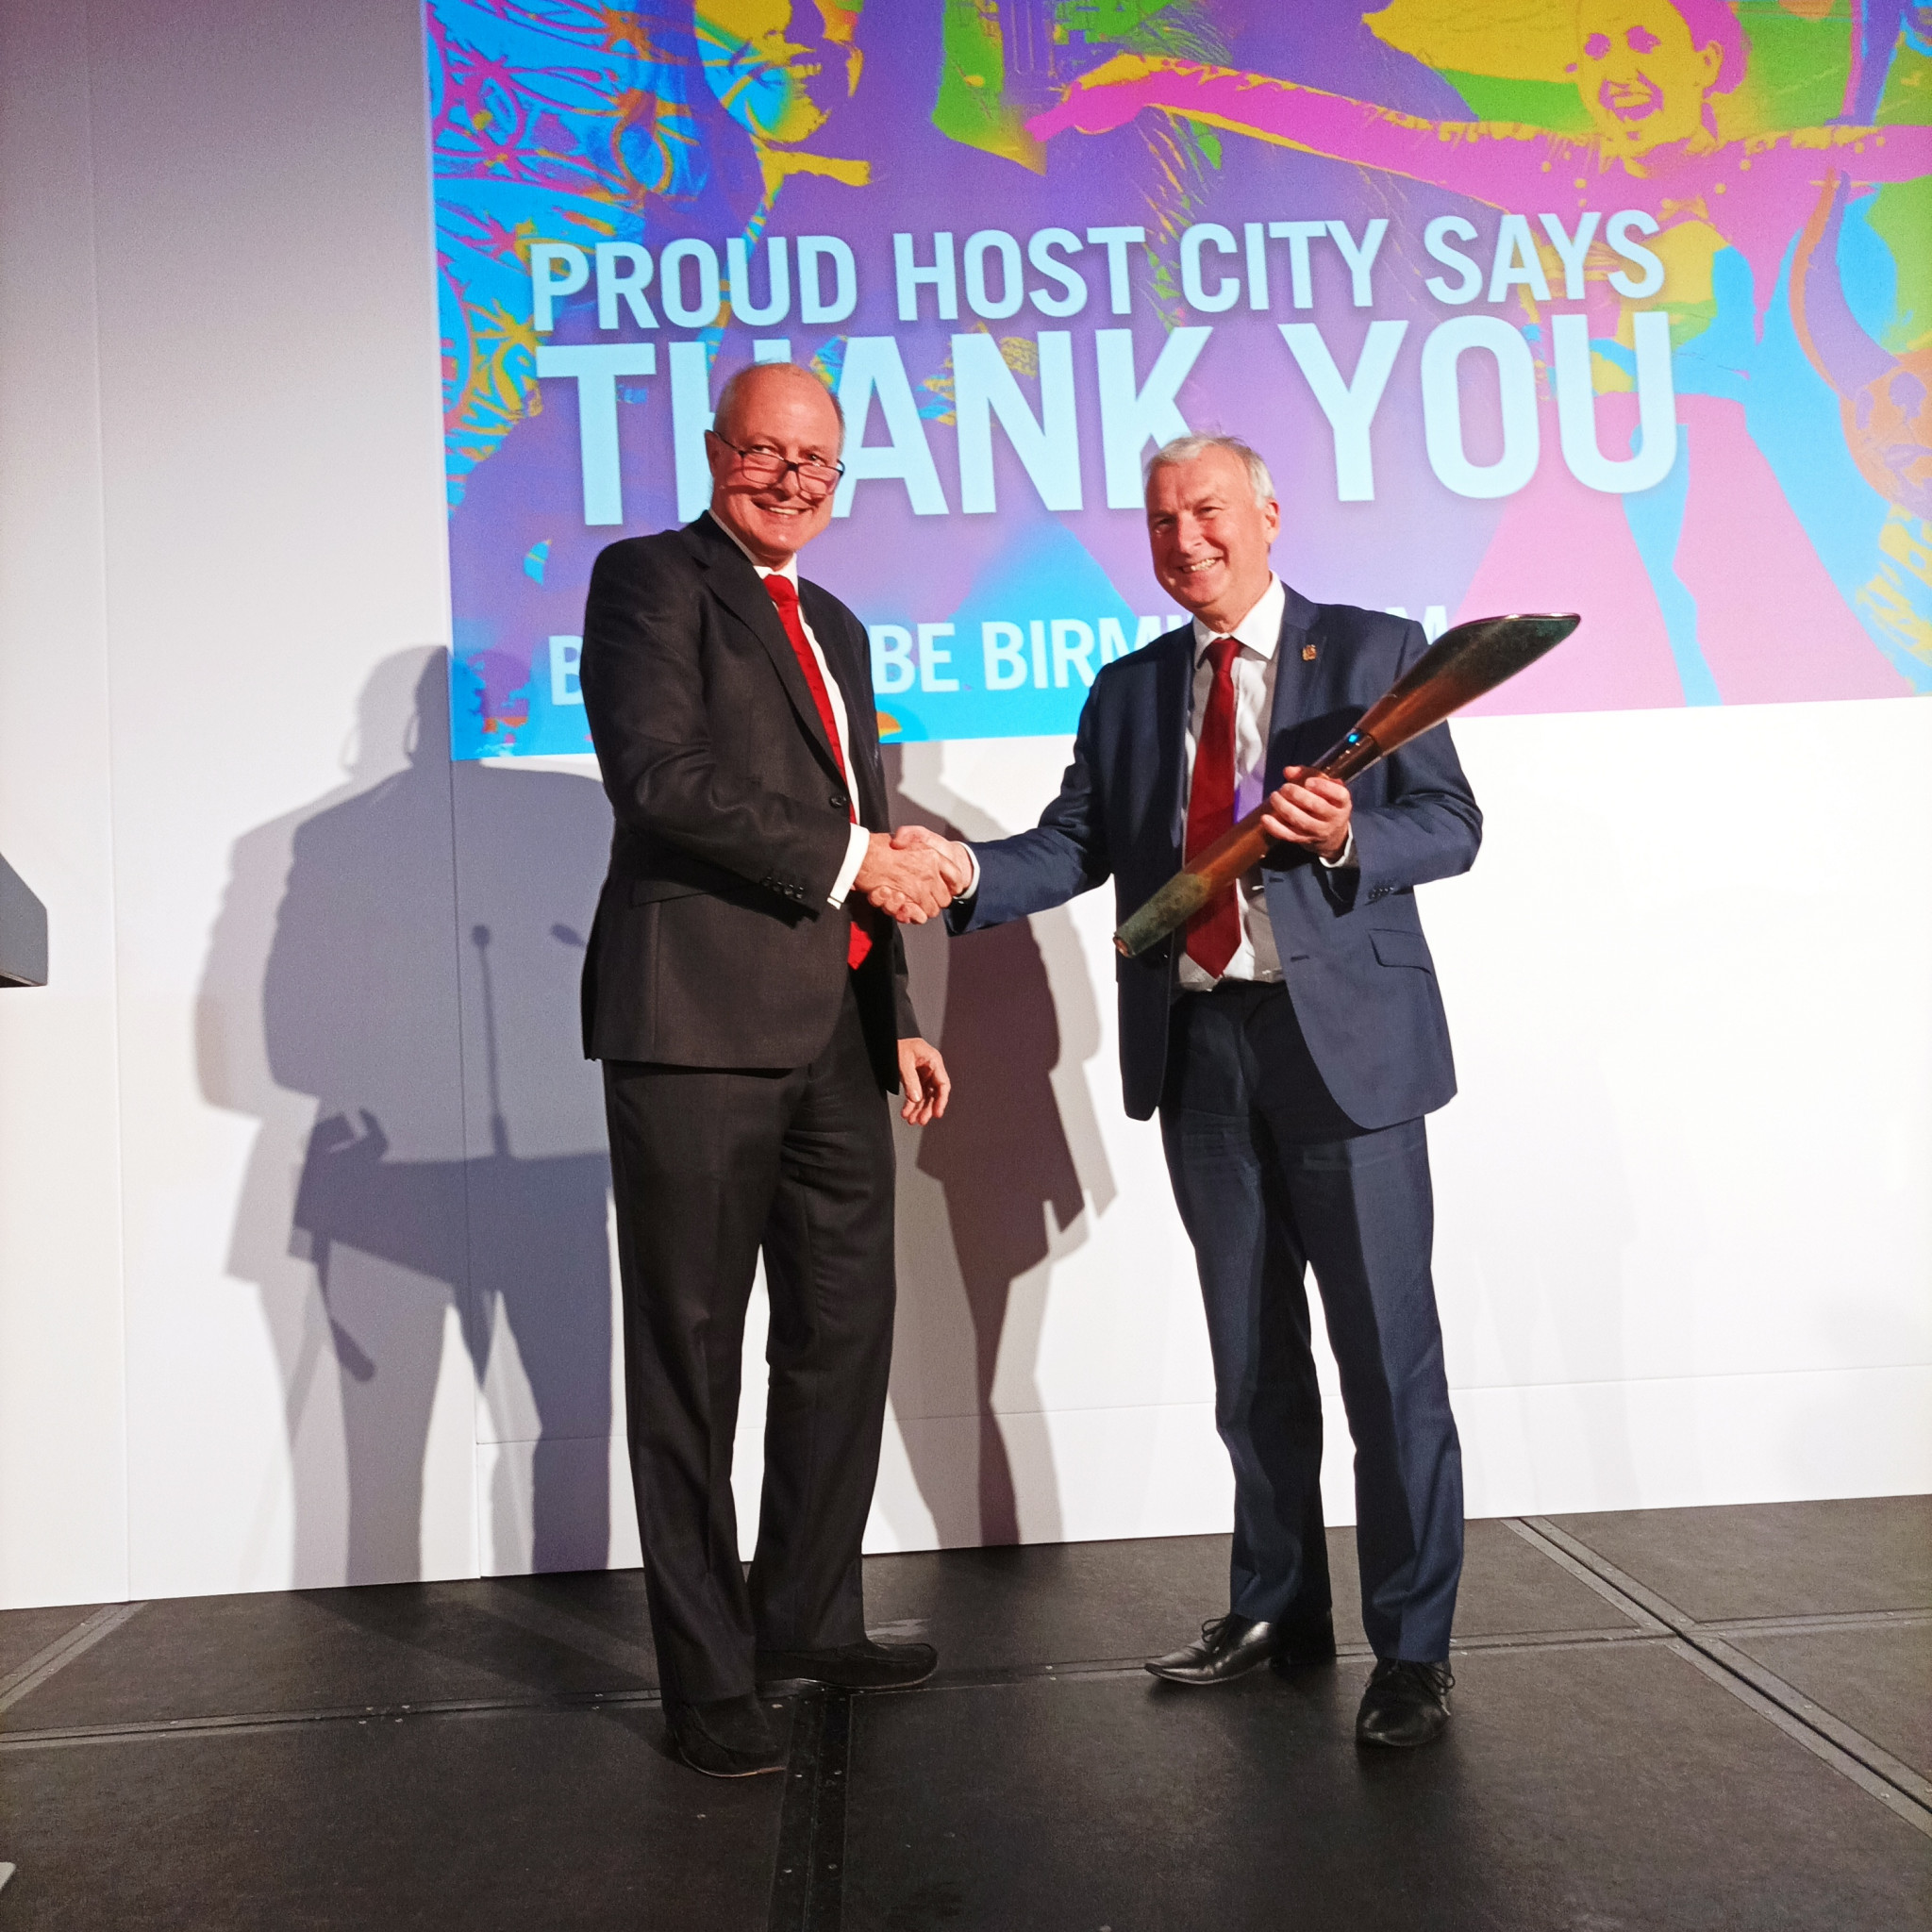 Council leader Ian Ward, right, said they will continue working with partners to benefit communities in the future ©ITG